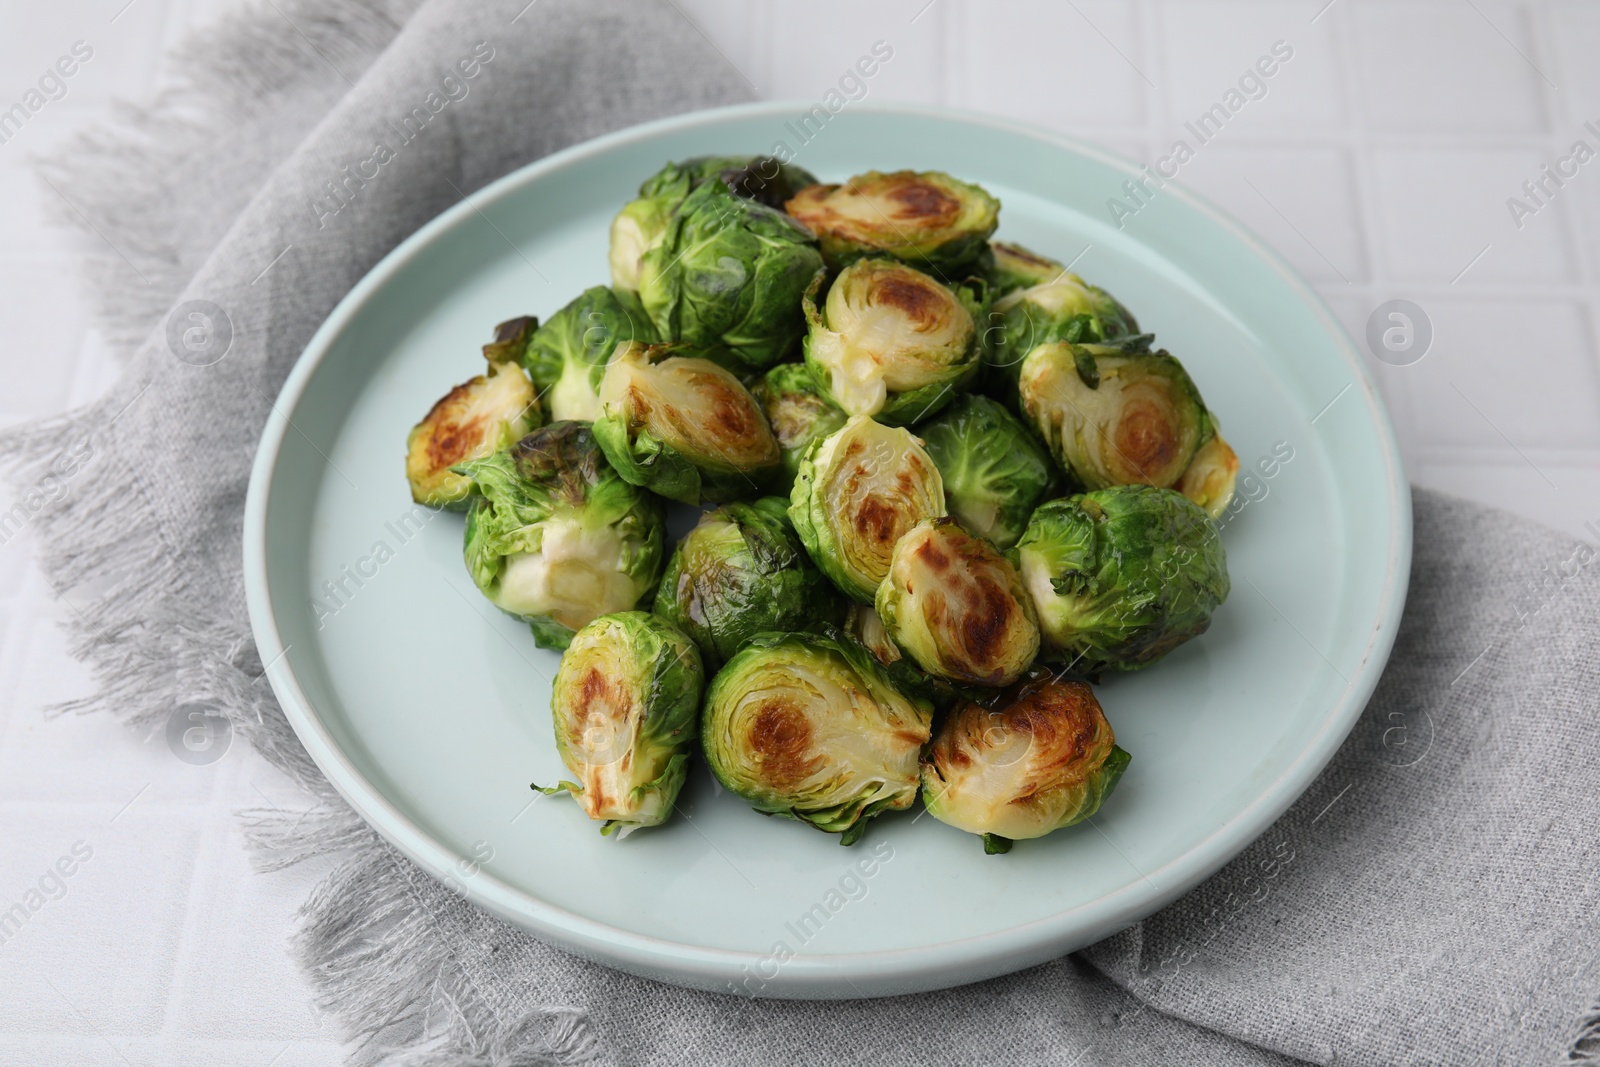 Photo of Delicious roasted Brussels sprouts on white tiled table